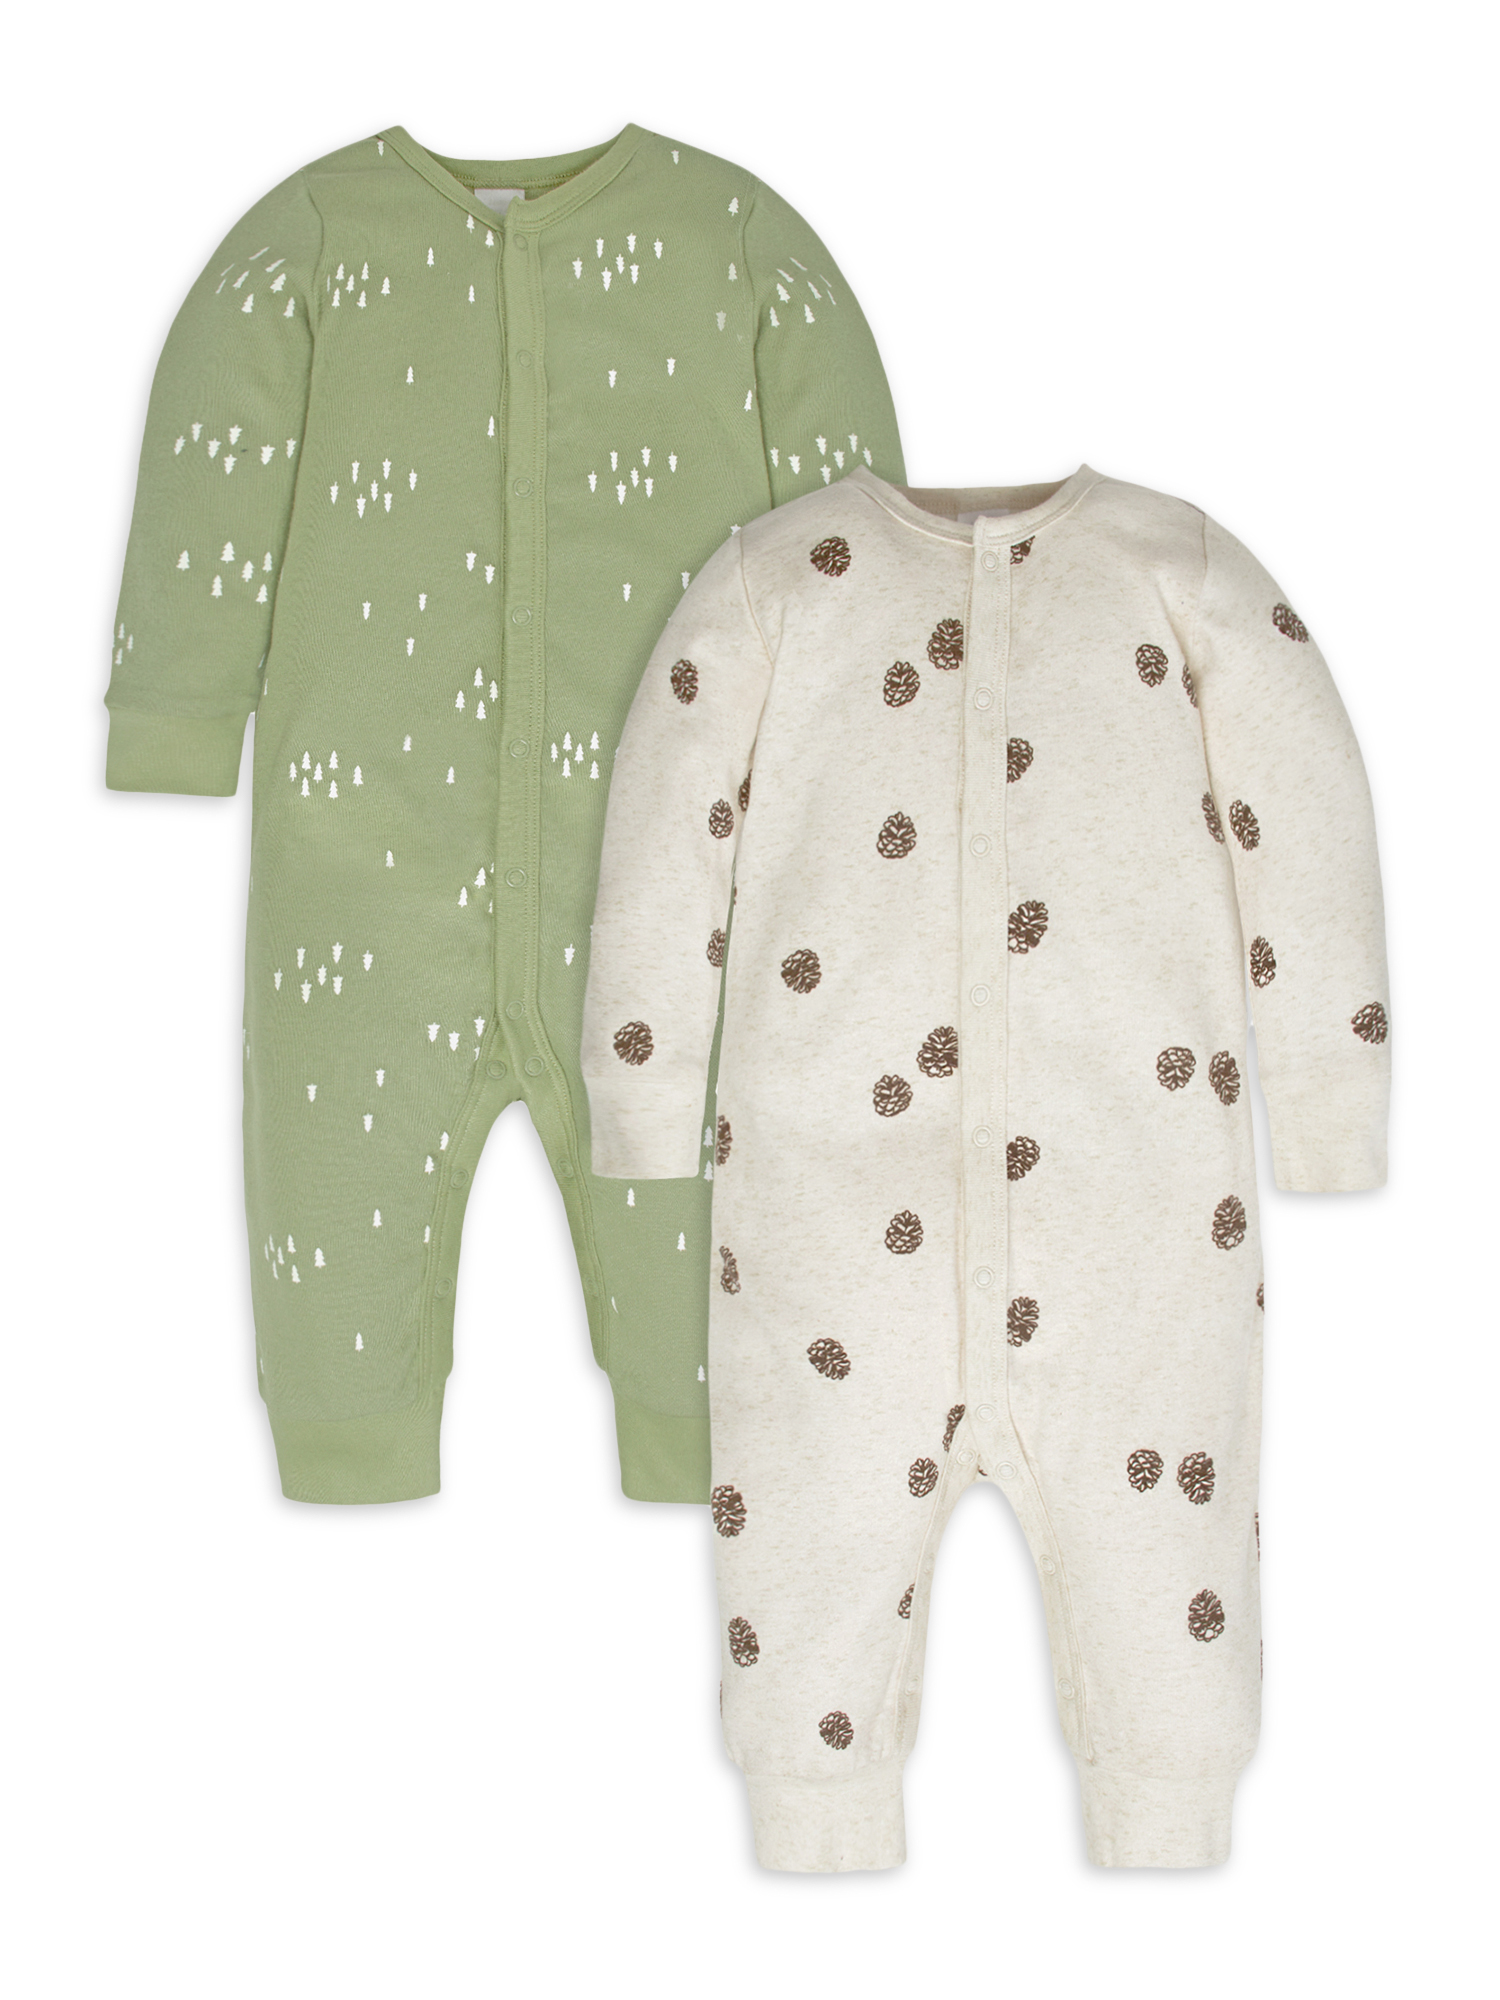 Modern Moments by Gerber Baby Boy Coveralls, 2-Pack (Newborn - 12M) - image 1 of 8